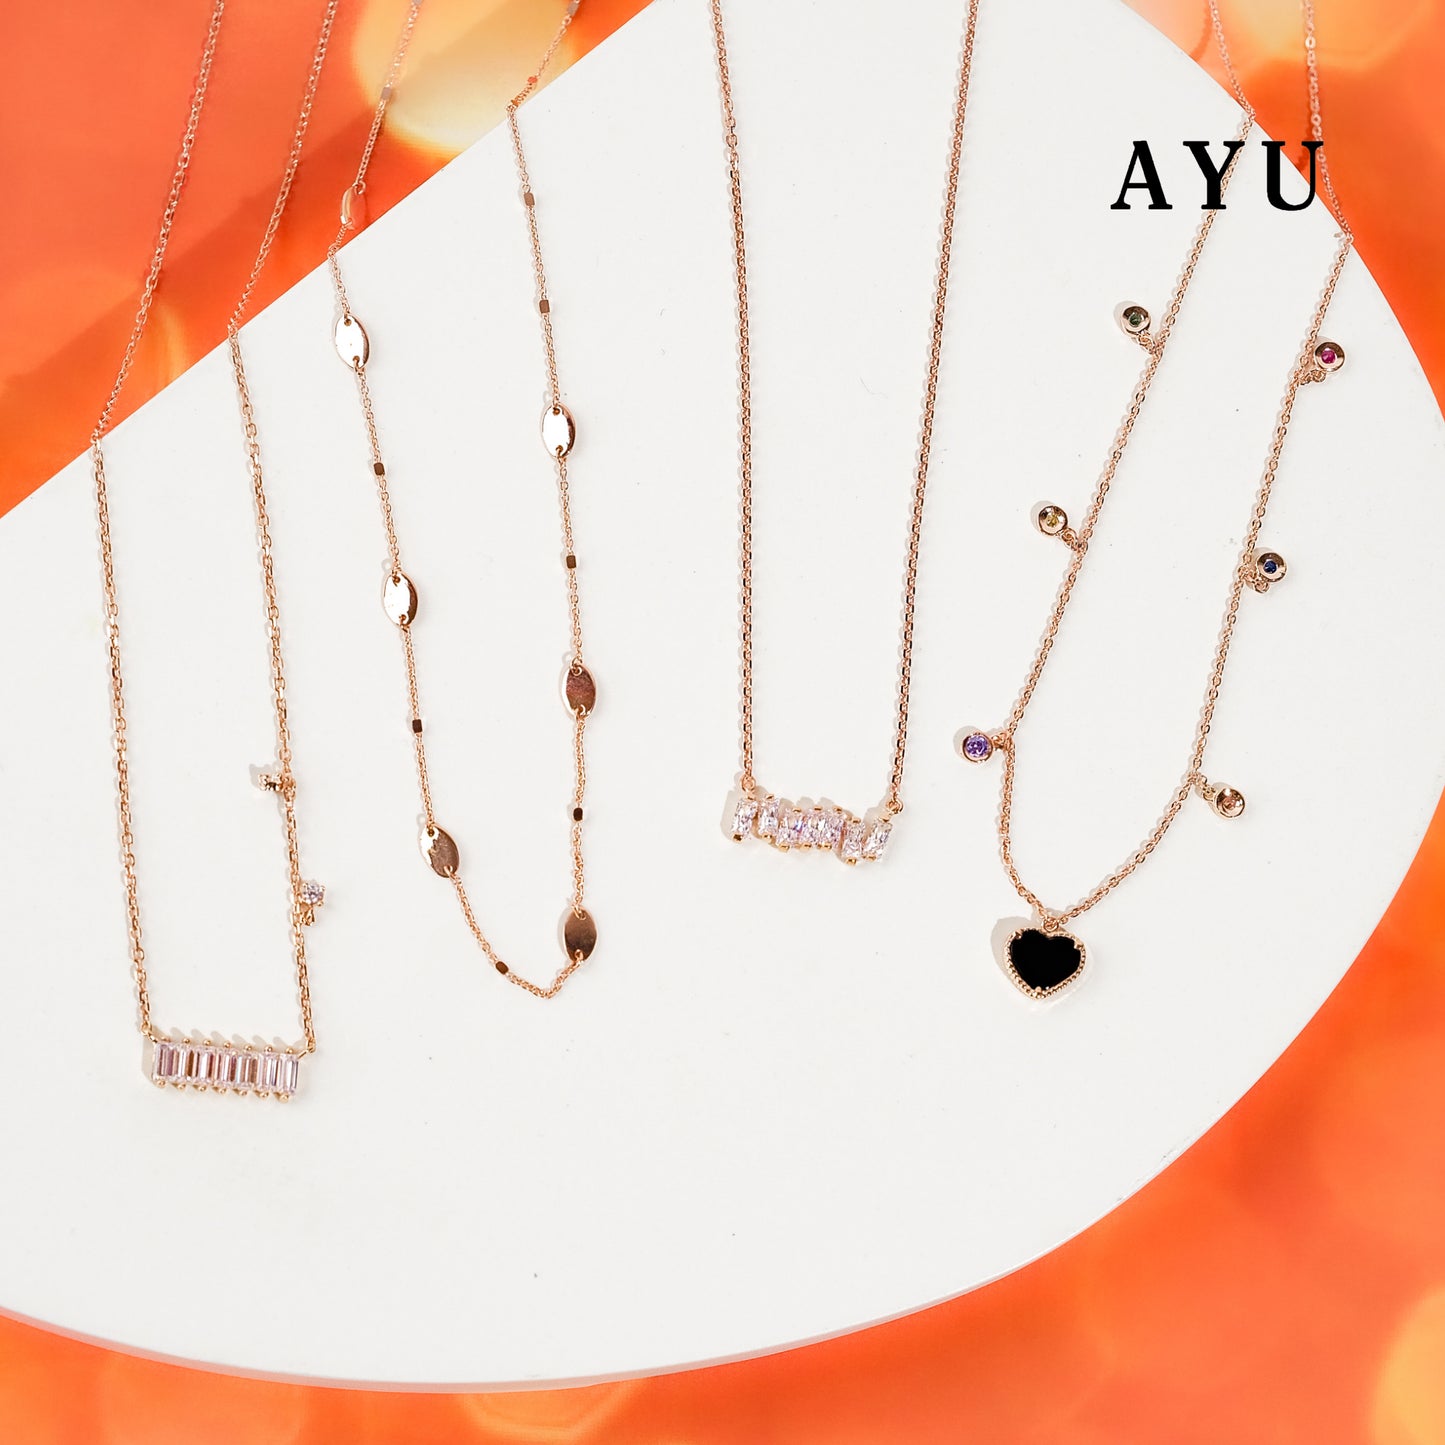 AYU Gold Oval With Bling Beads Chain Necklace 17k Rose Gold